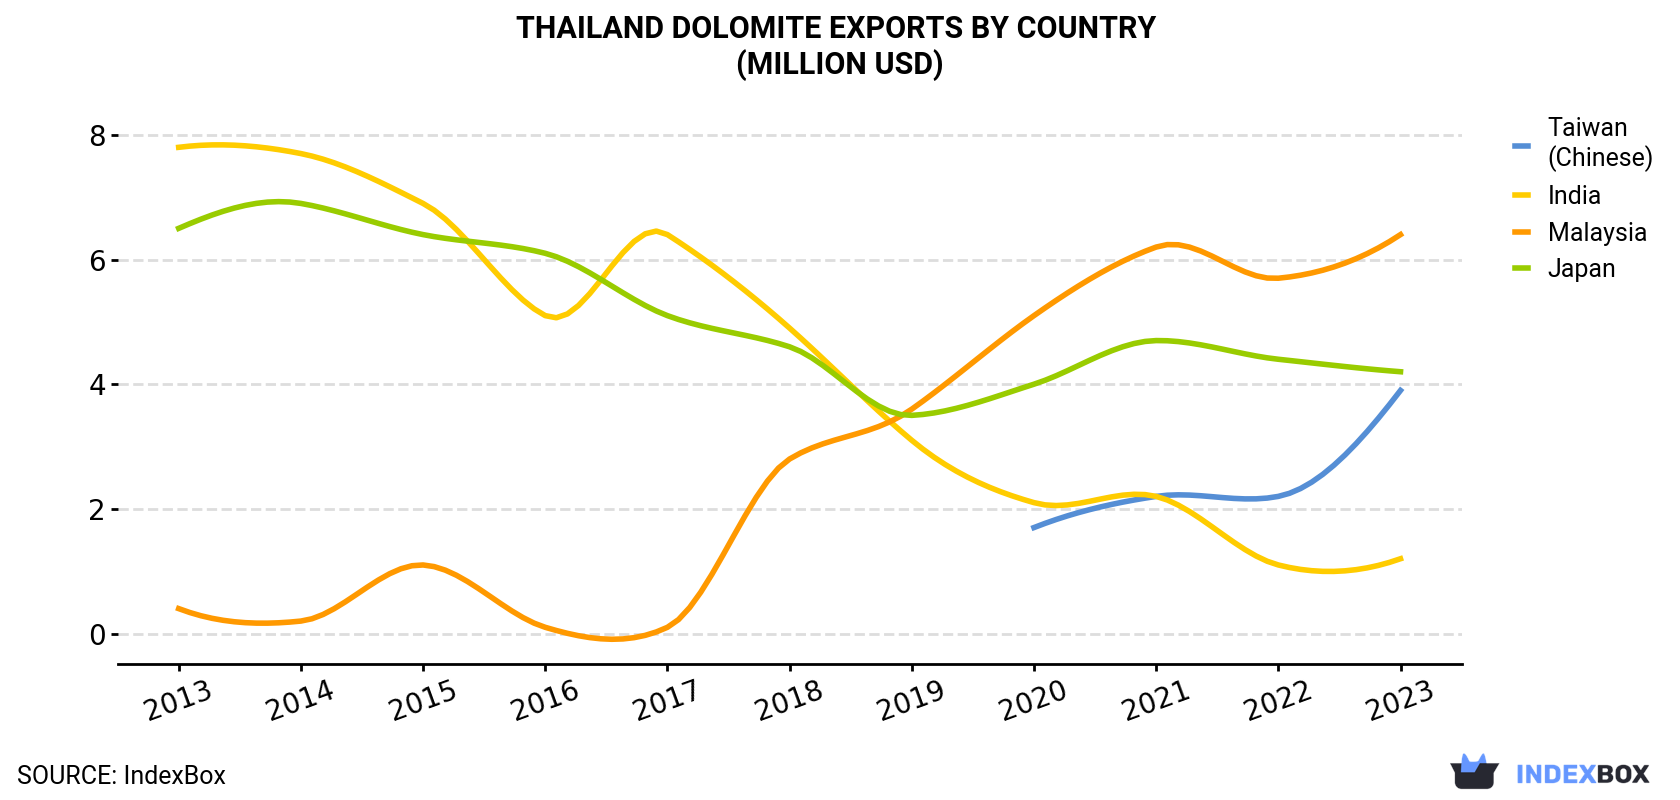 Thailand Dolomite Exports By Country (Million USD)